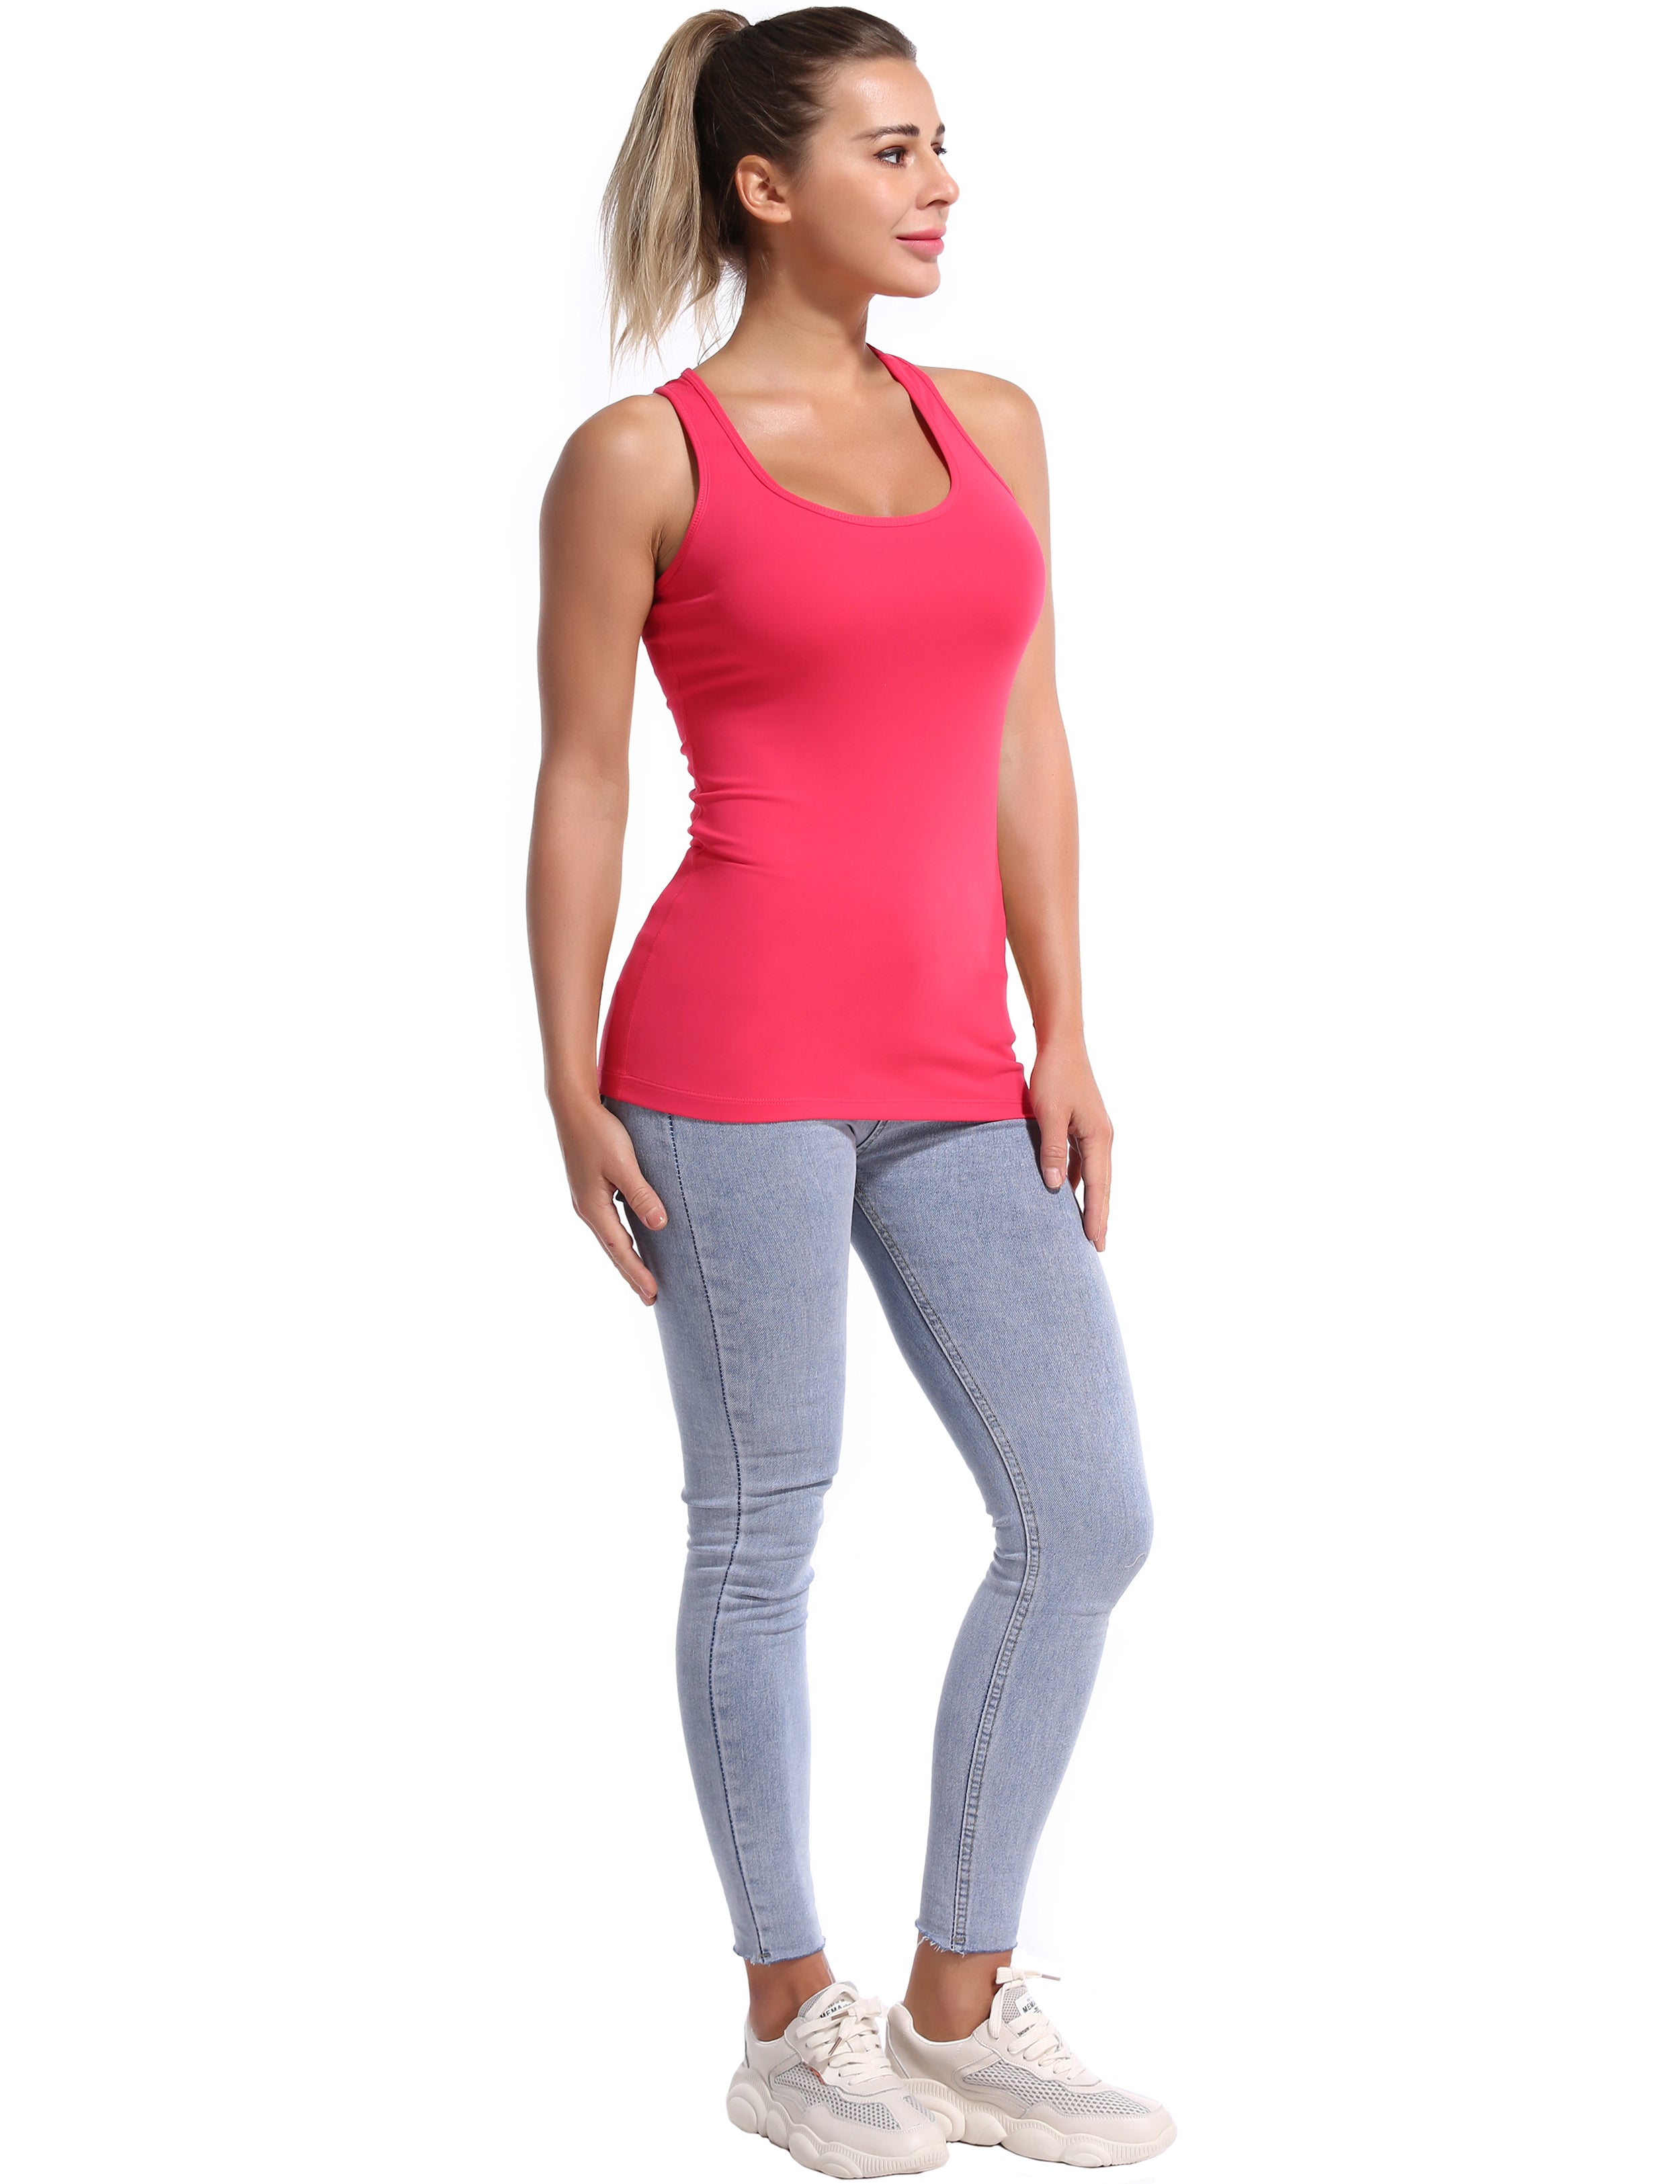 Racerback Athletic Tank Tops red 92%Nylon/8%Spandex(Cotton Soft) Designed for Pilates Tight Fit So buttery soft, it feels weightless Sweat-wicking Four-way stretch Breathable Contours your body Sits below the waistband for moderate, everyday coverage